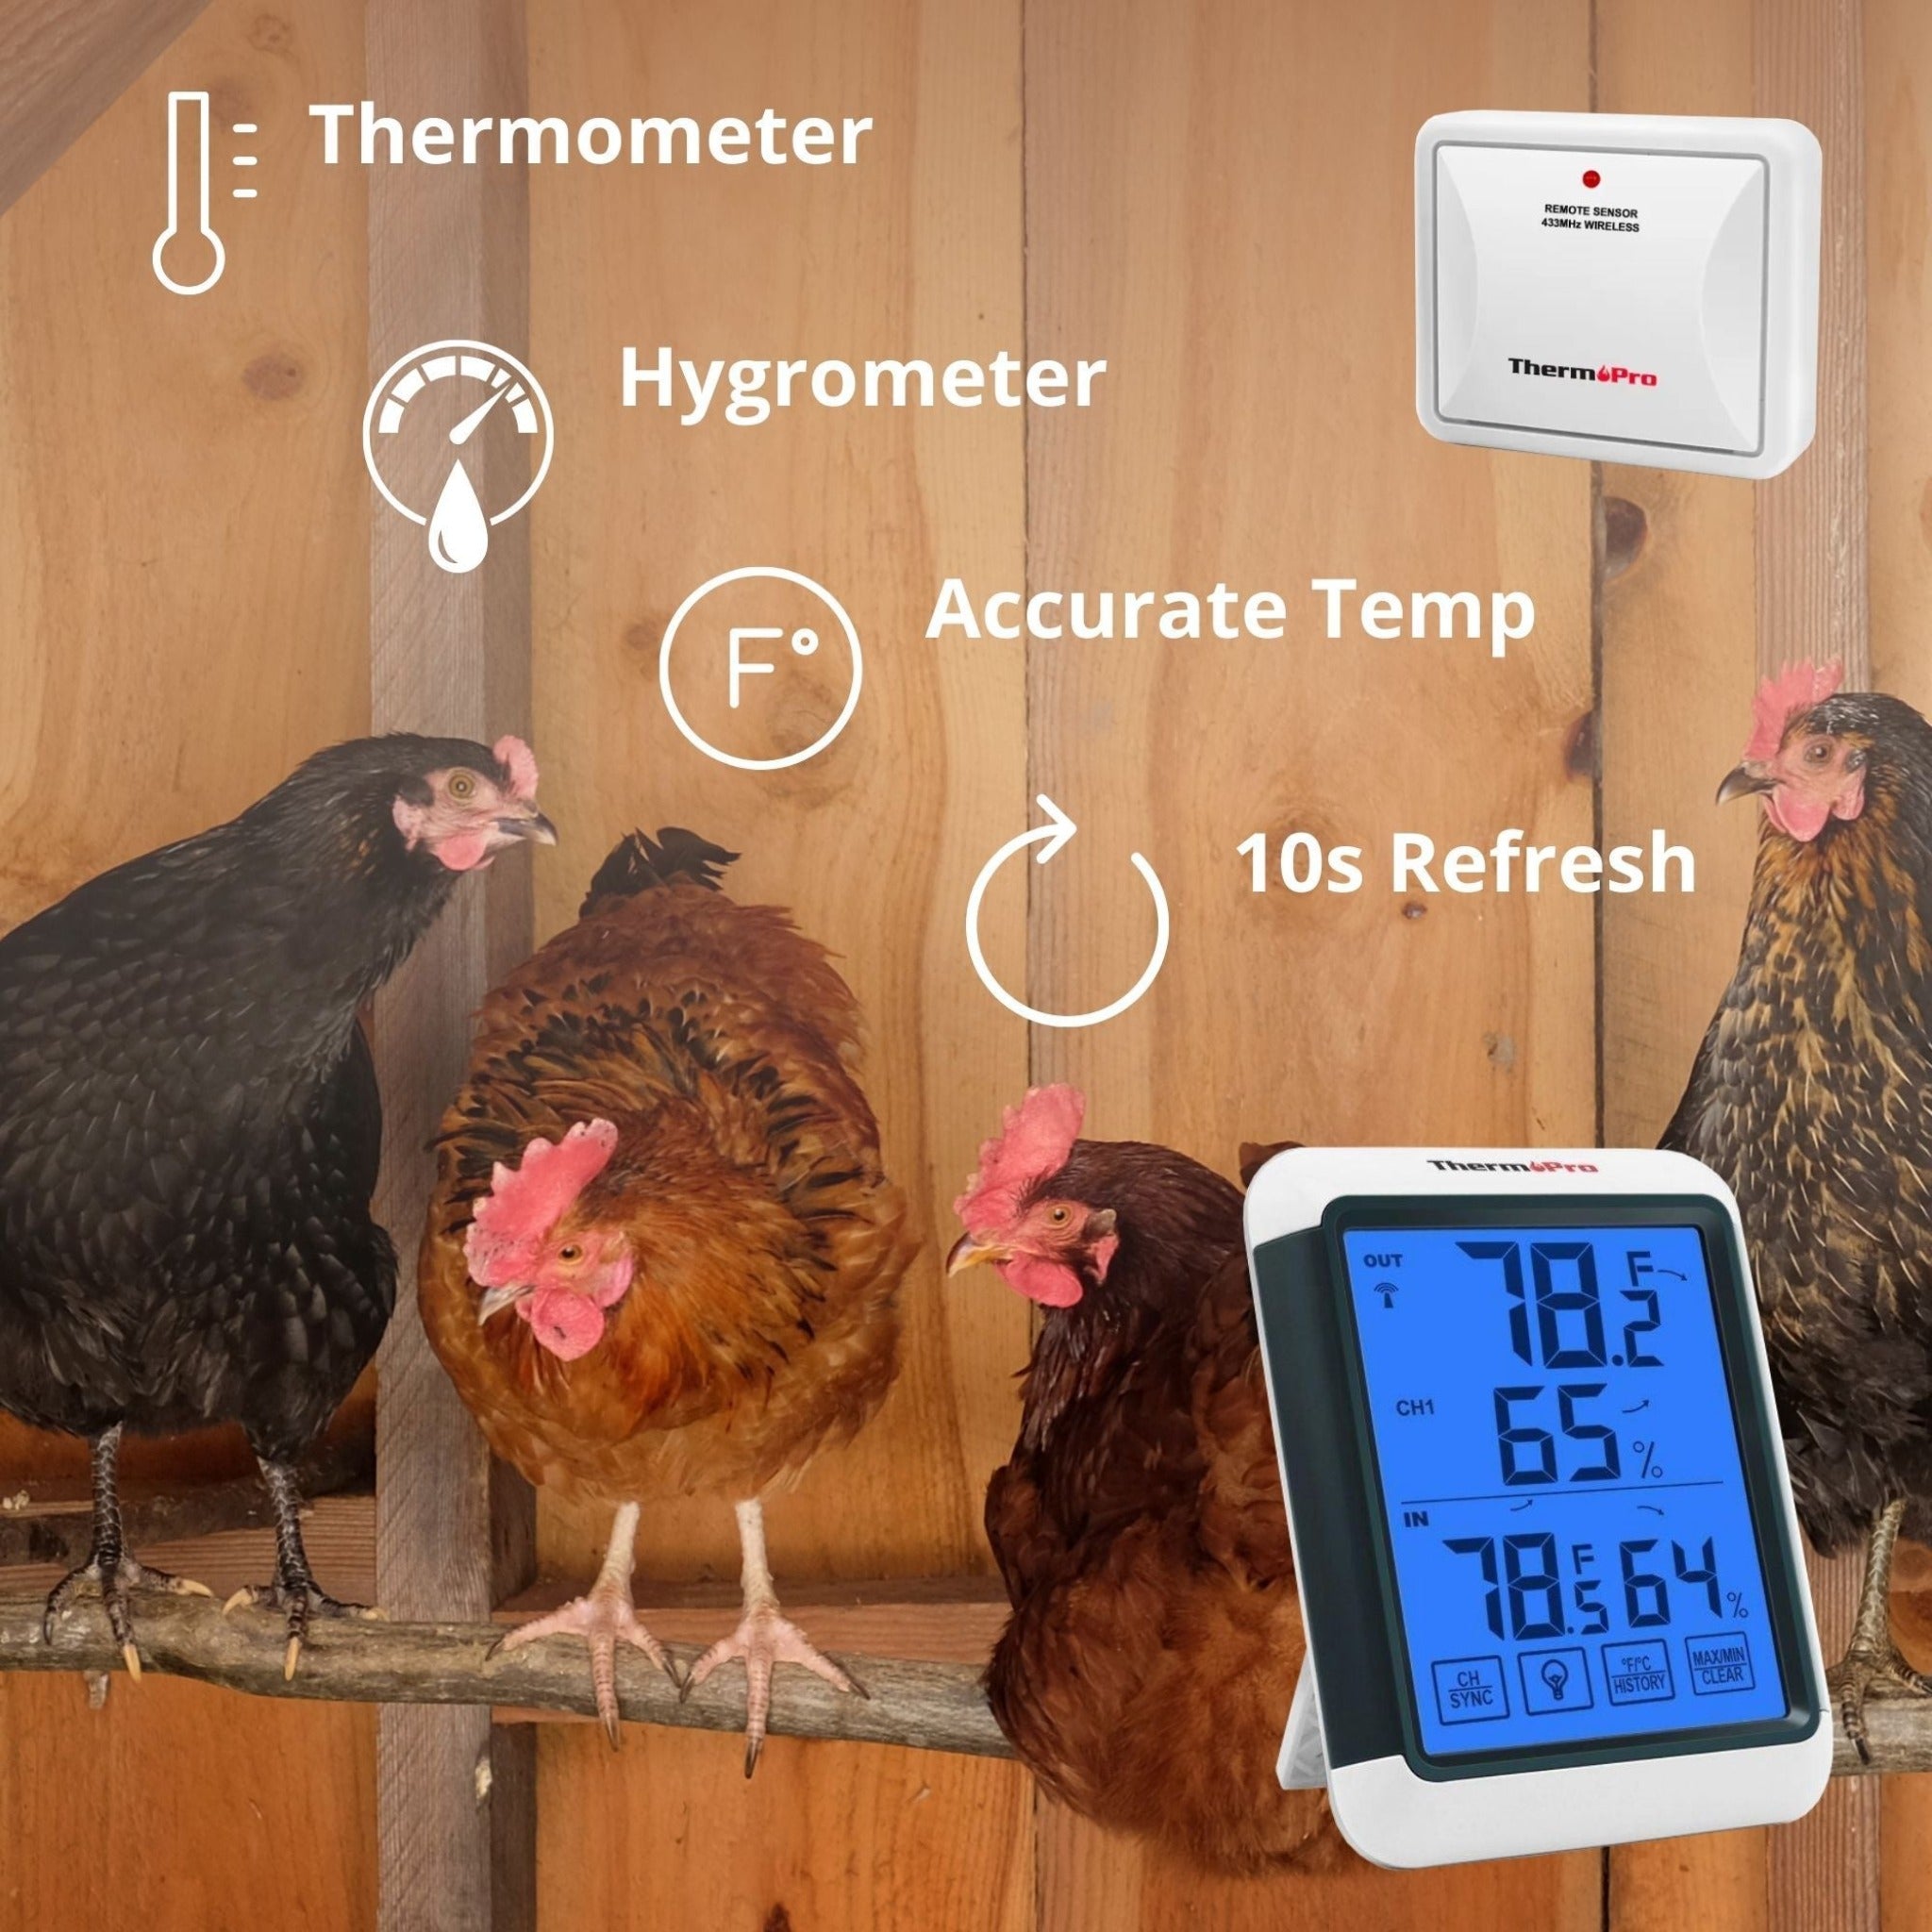 Hatching Time Therm pro. Infographic shows capabilities of sensor. Thermometer, hygrometer, accurate temperature and 10s refresh rate.